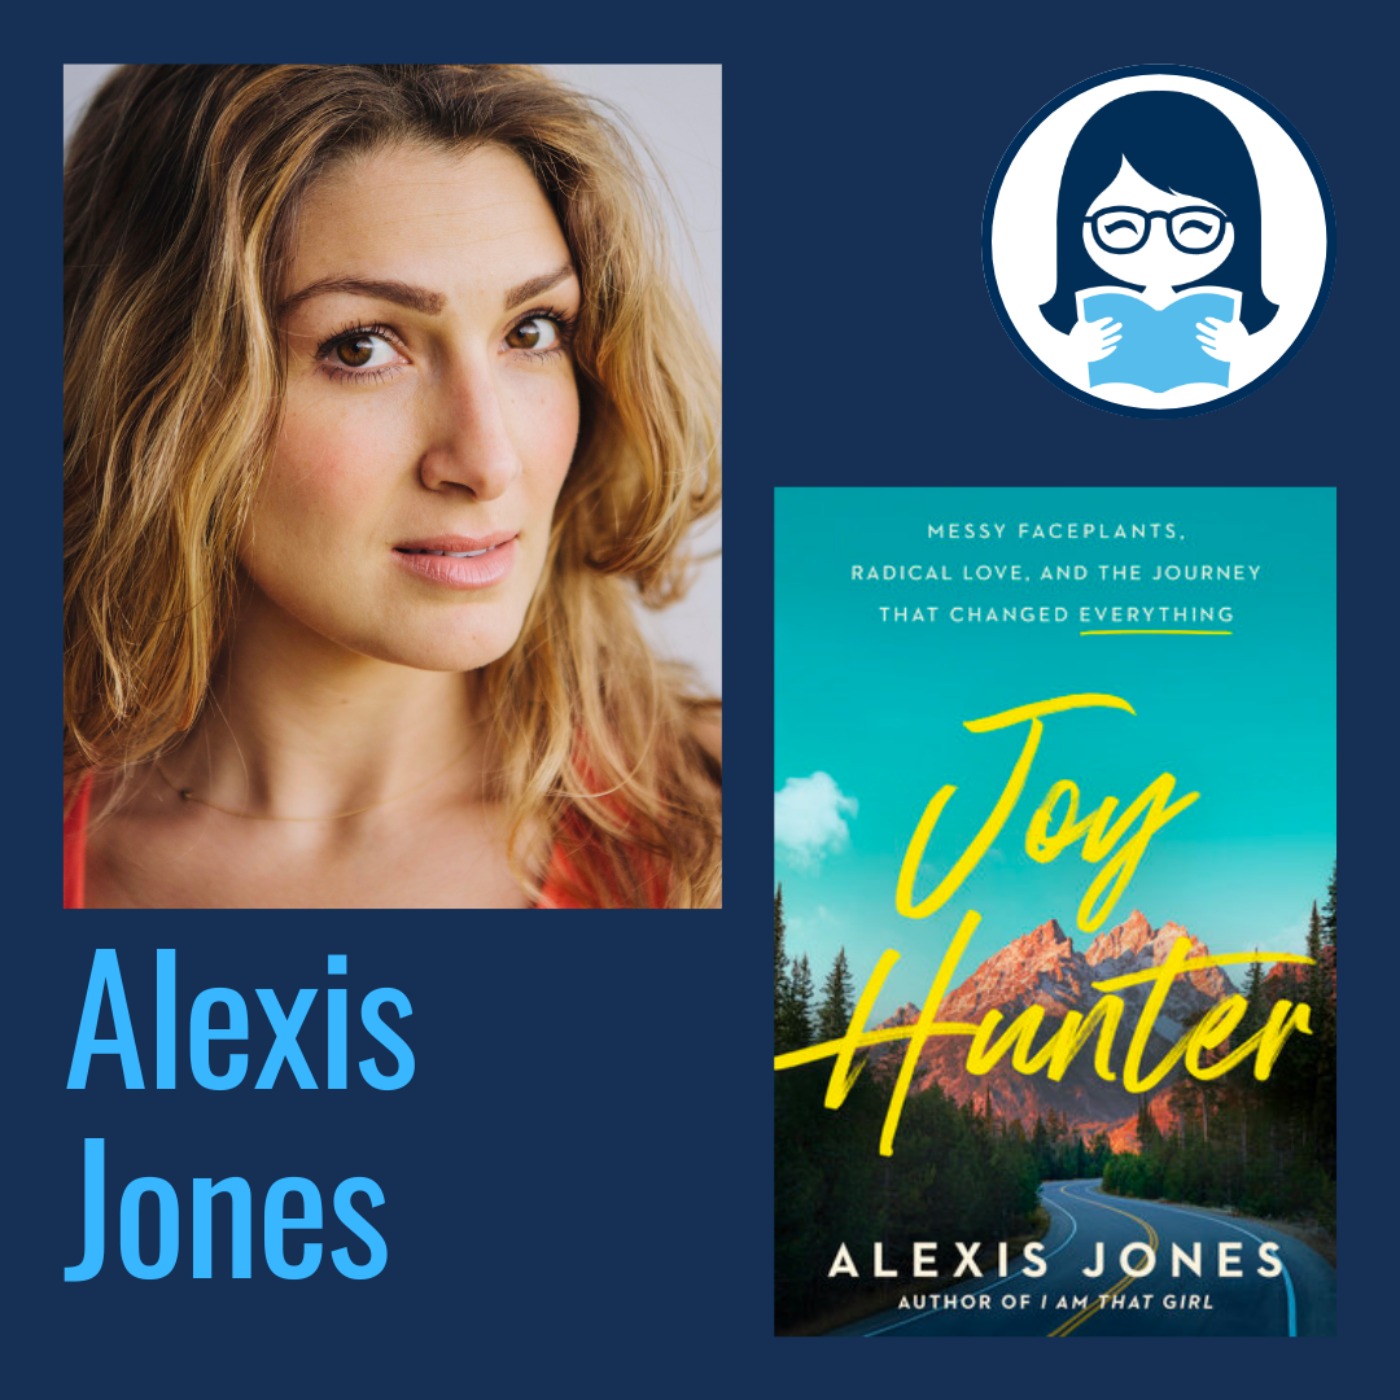 Alexis Jones, JOY HUNTER: Messy Faceplants, Radical Love, and the Journey That Changed Everything